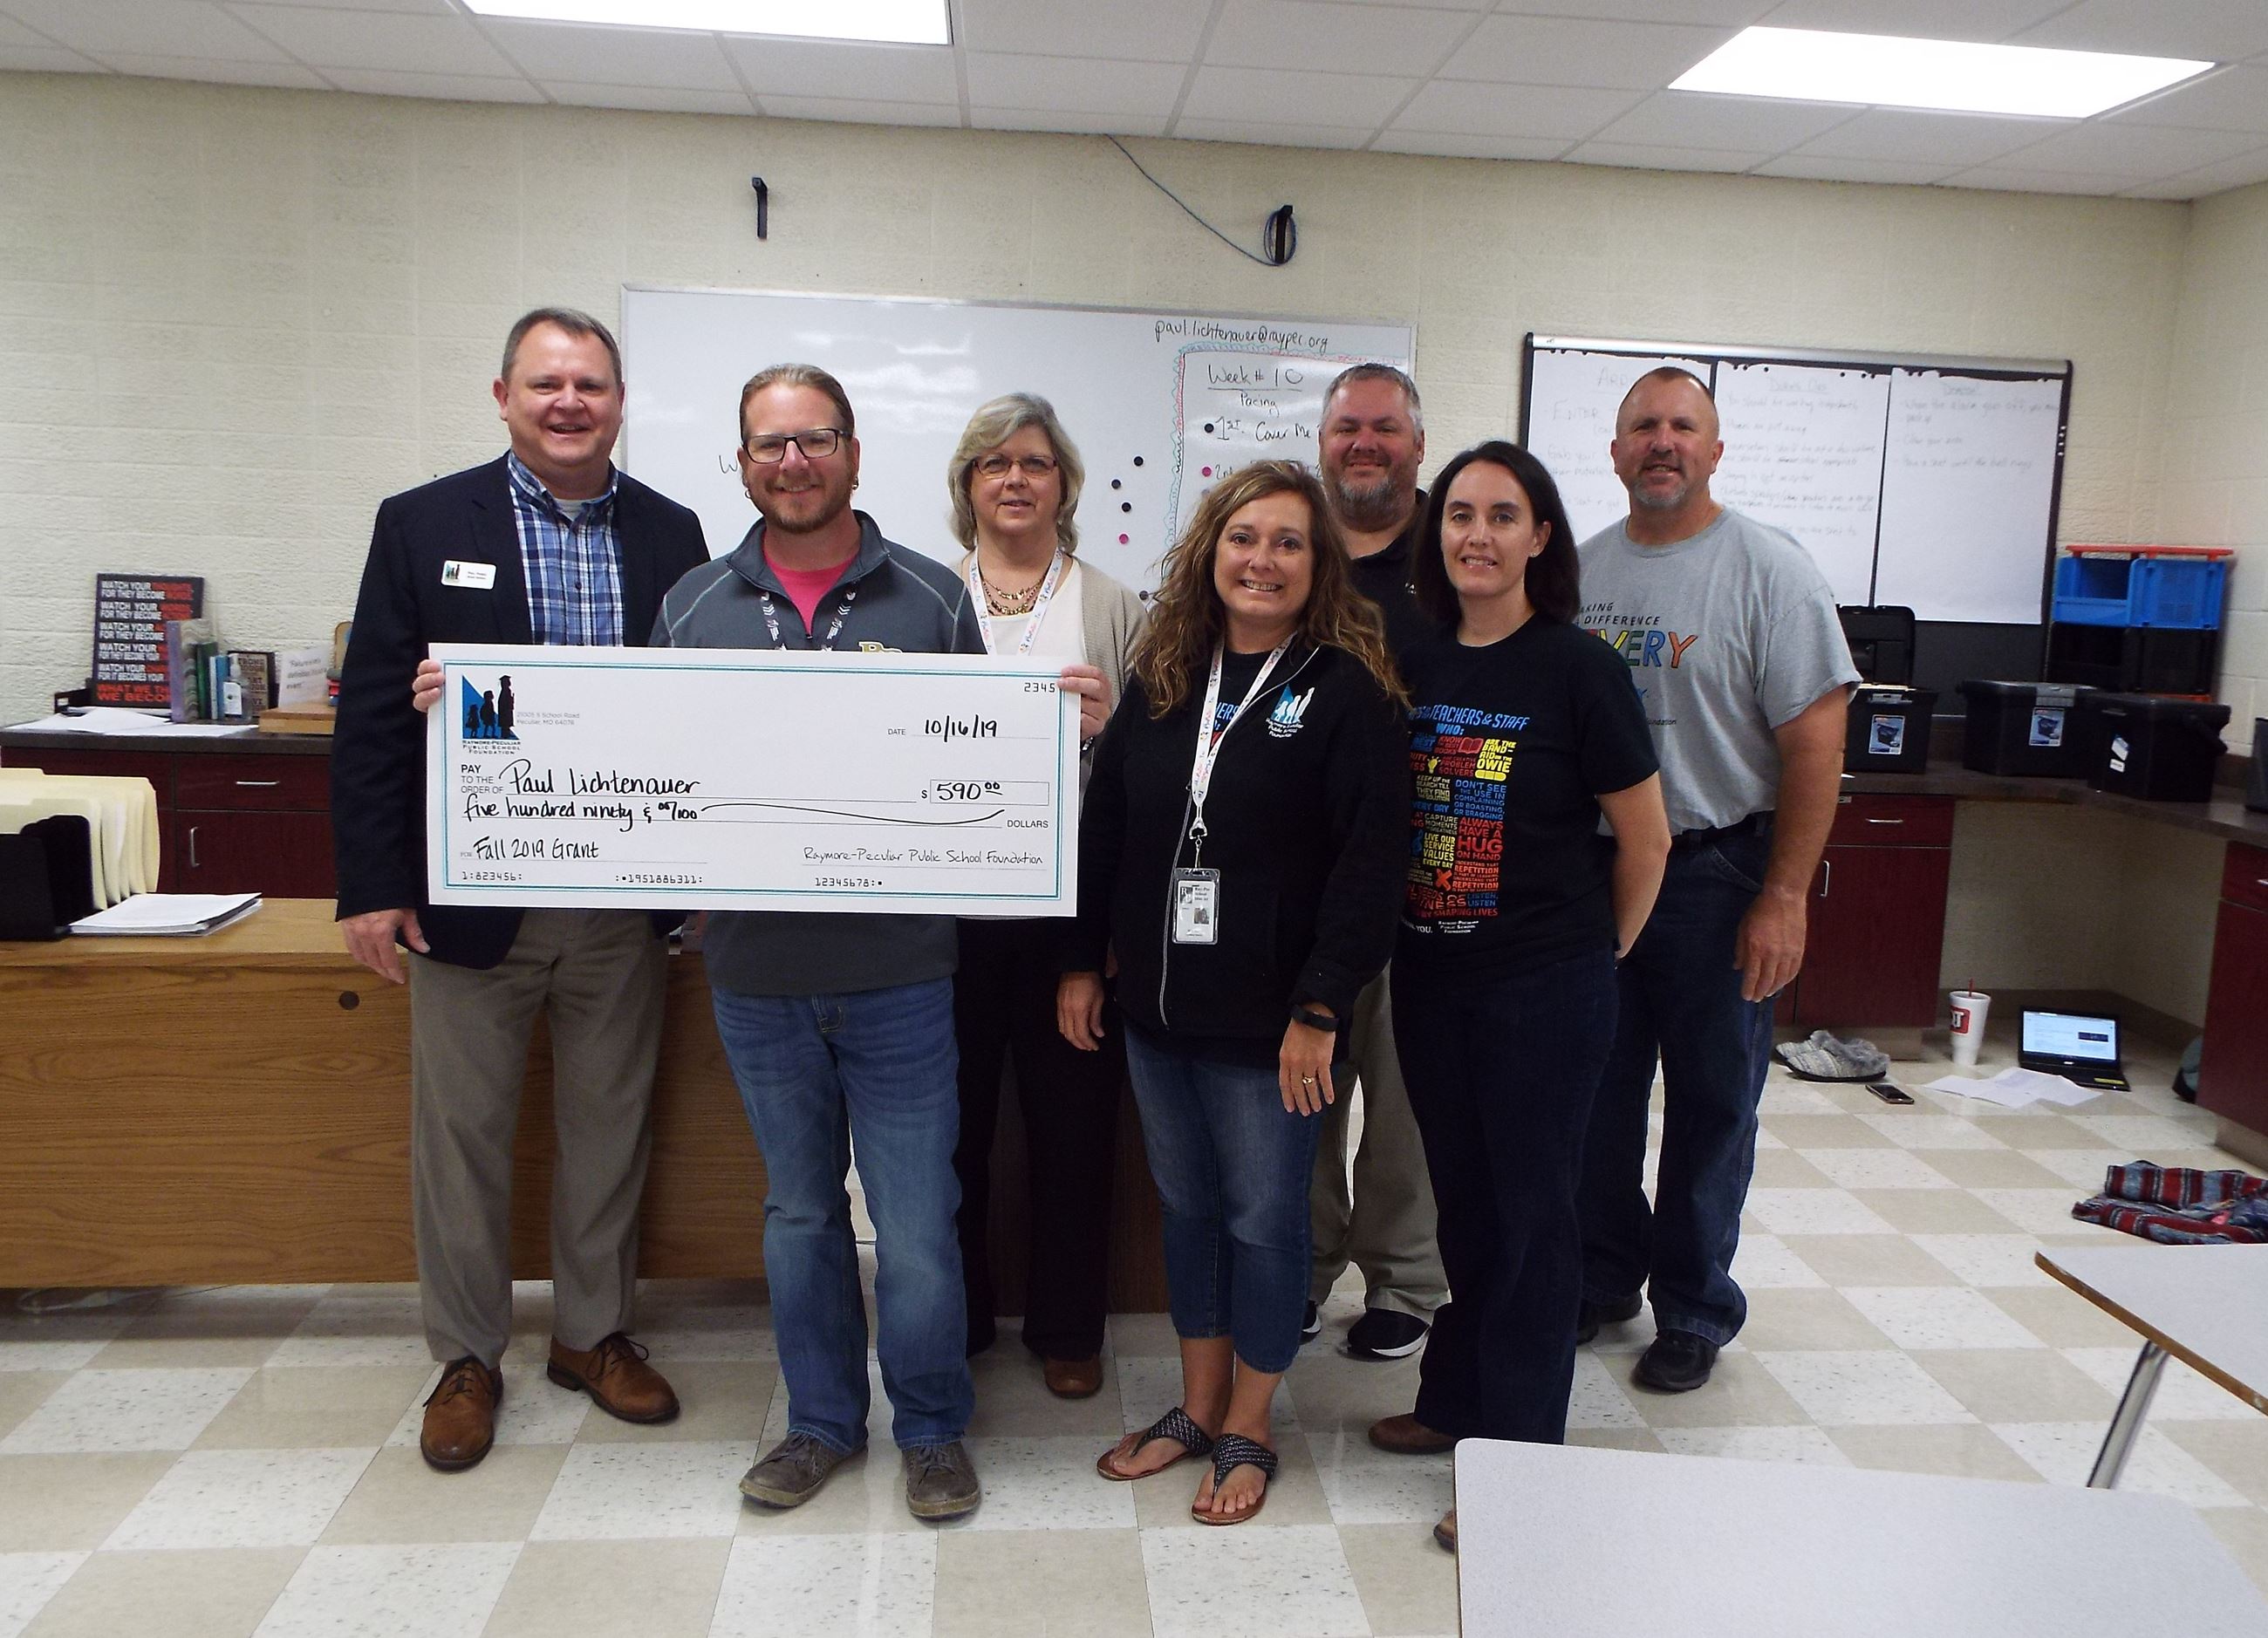 Teacher Paul Lichtenauer received a $590 grant to purchase microphones and software that will enable students at Ray-Pec Academy to record, edit and distribute an audio podcast.